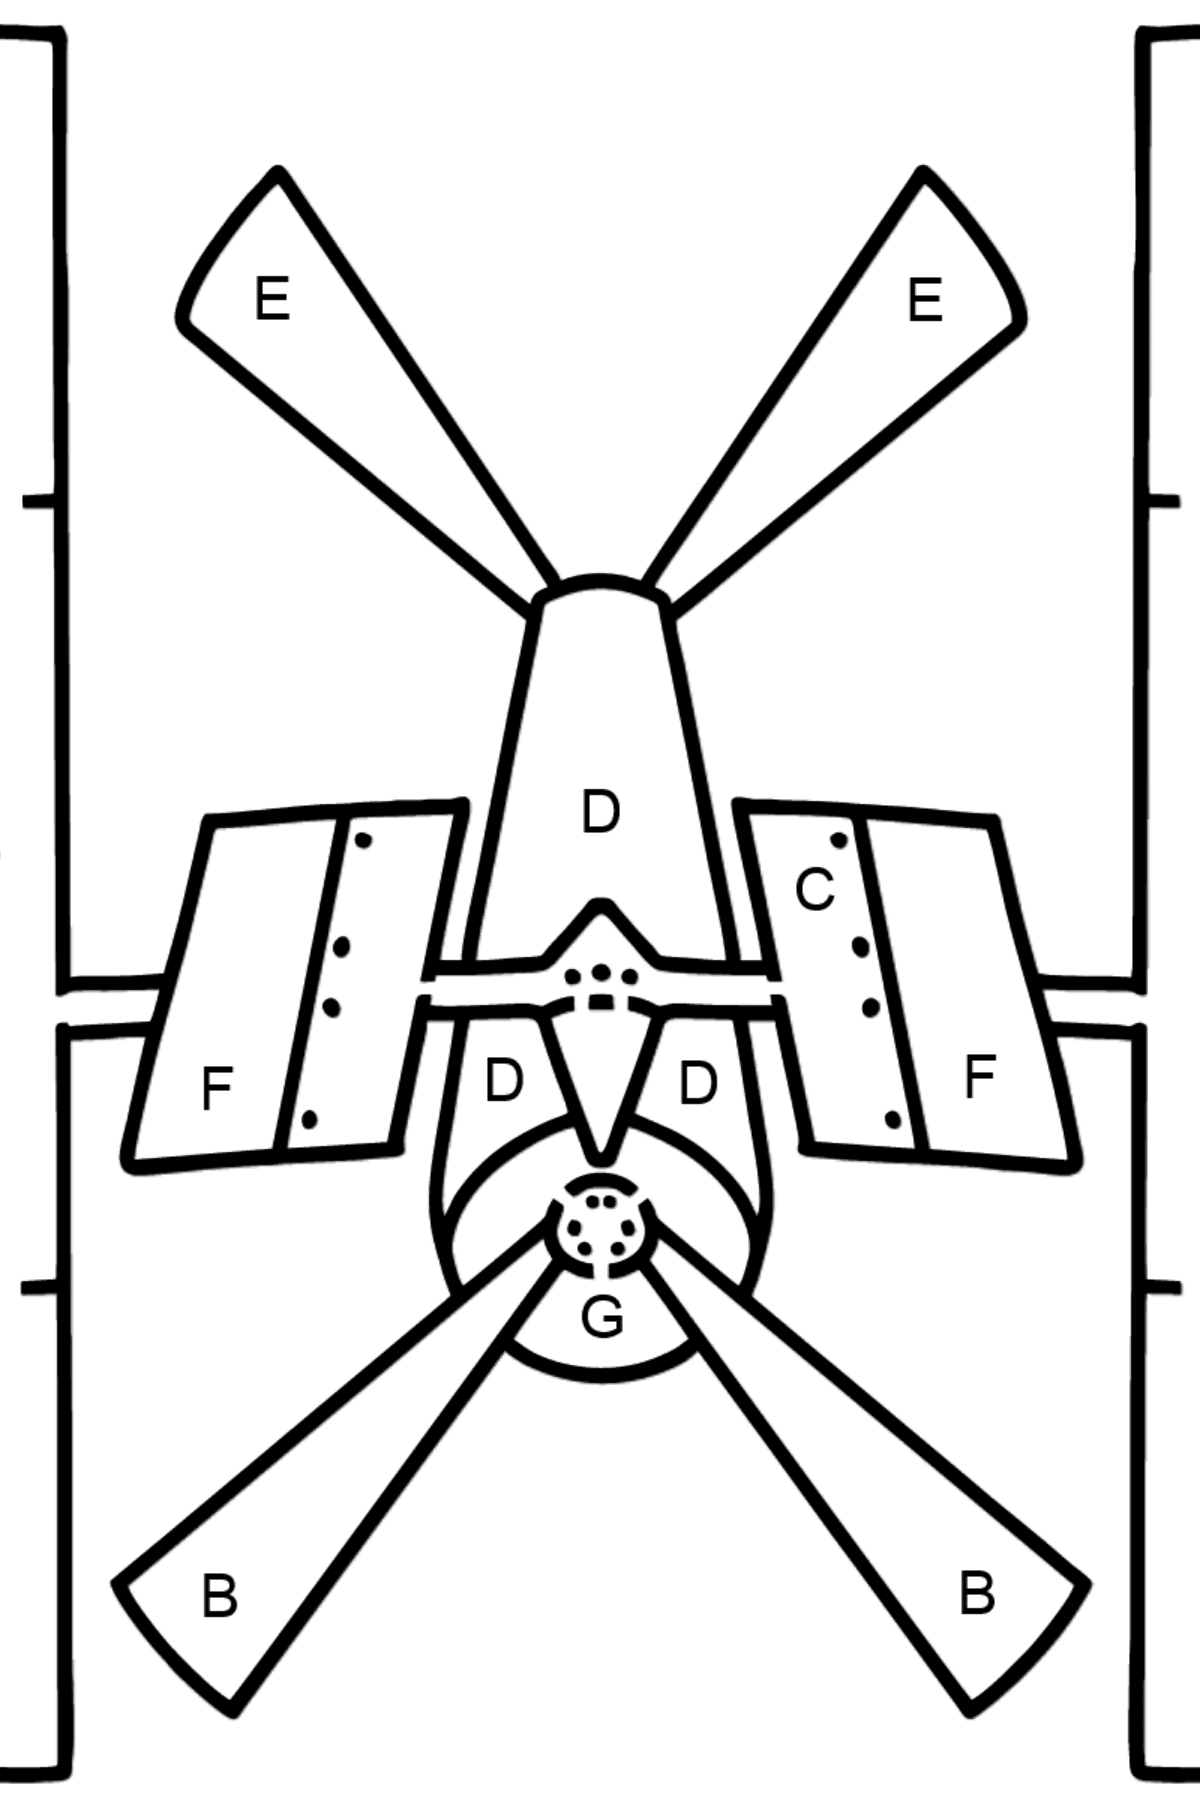 Space Station coloring page - Coloring by Letters for Kids